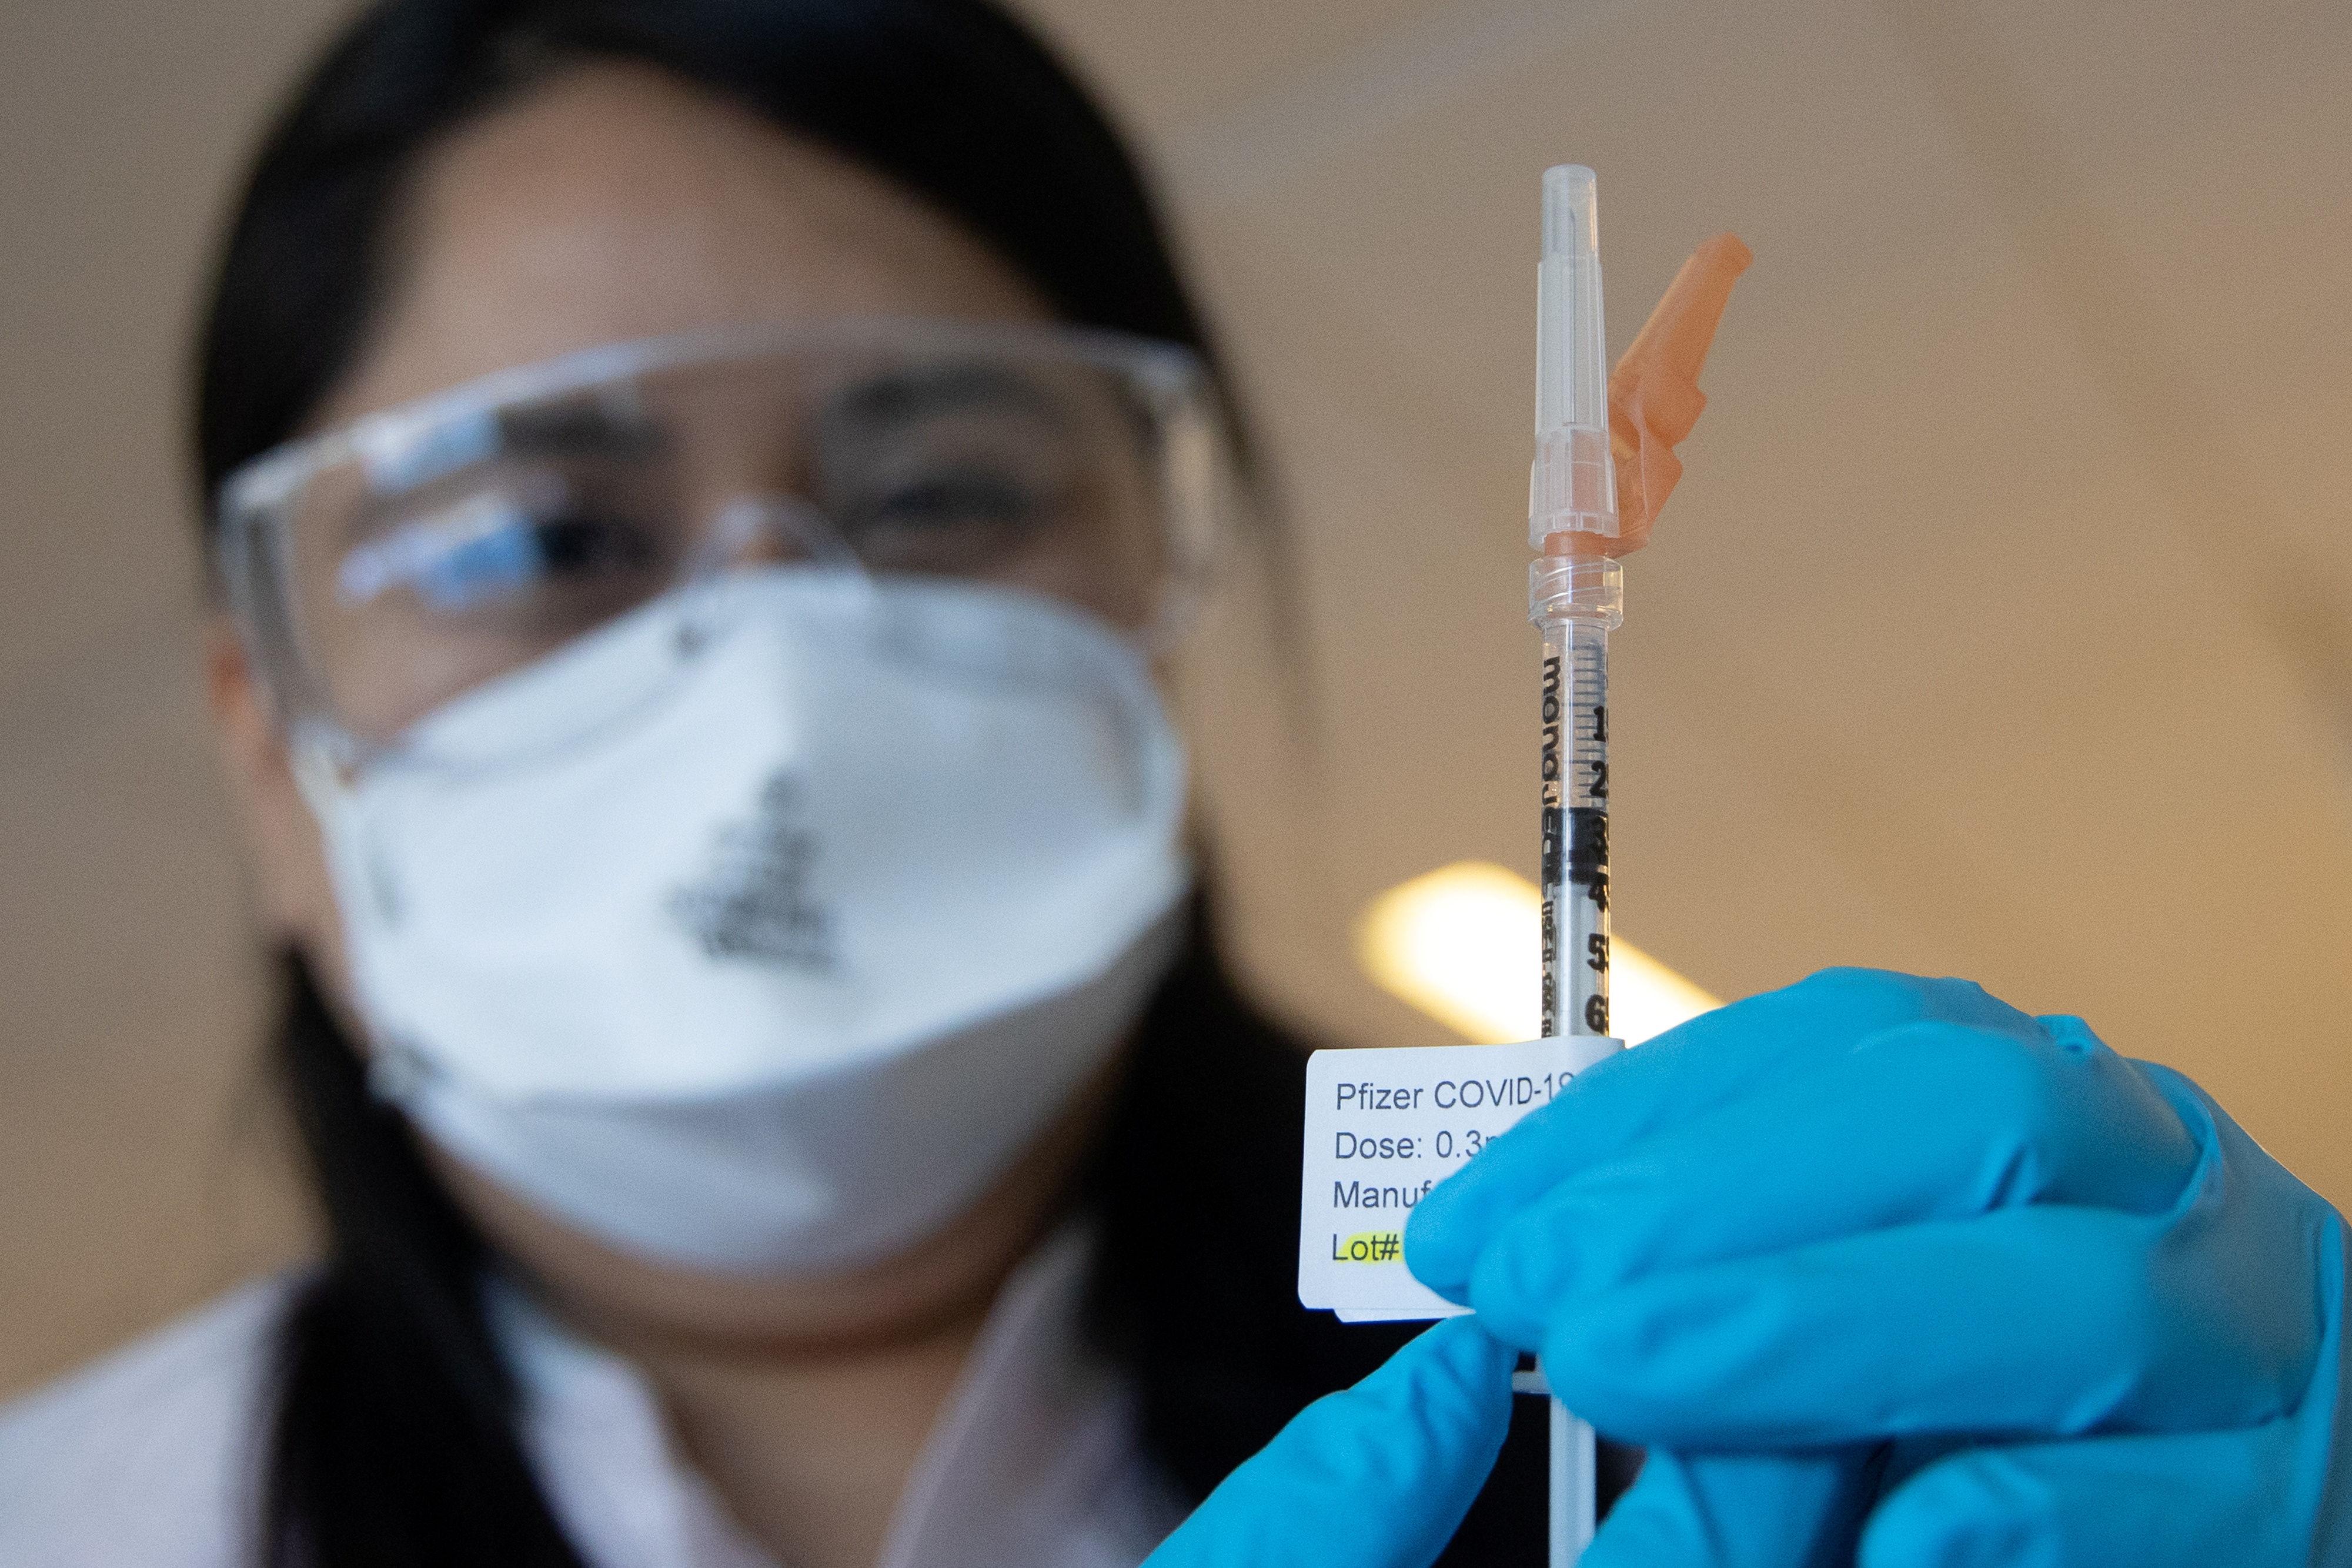 A nurse Cindy Mendez wearing a protective mask holds a syringe with a dose of the Pfizer-BioNTech COVID-19 vaccine during the coronavirus disease (COVID-19) pandemic, at NYC Health + Hospitals Harlem Hospital in the Manhattan borough of New York City, New York, U.S., February 25, 2021. REUTERS/Jeenah Moon